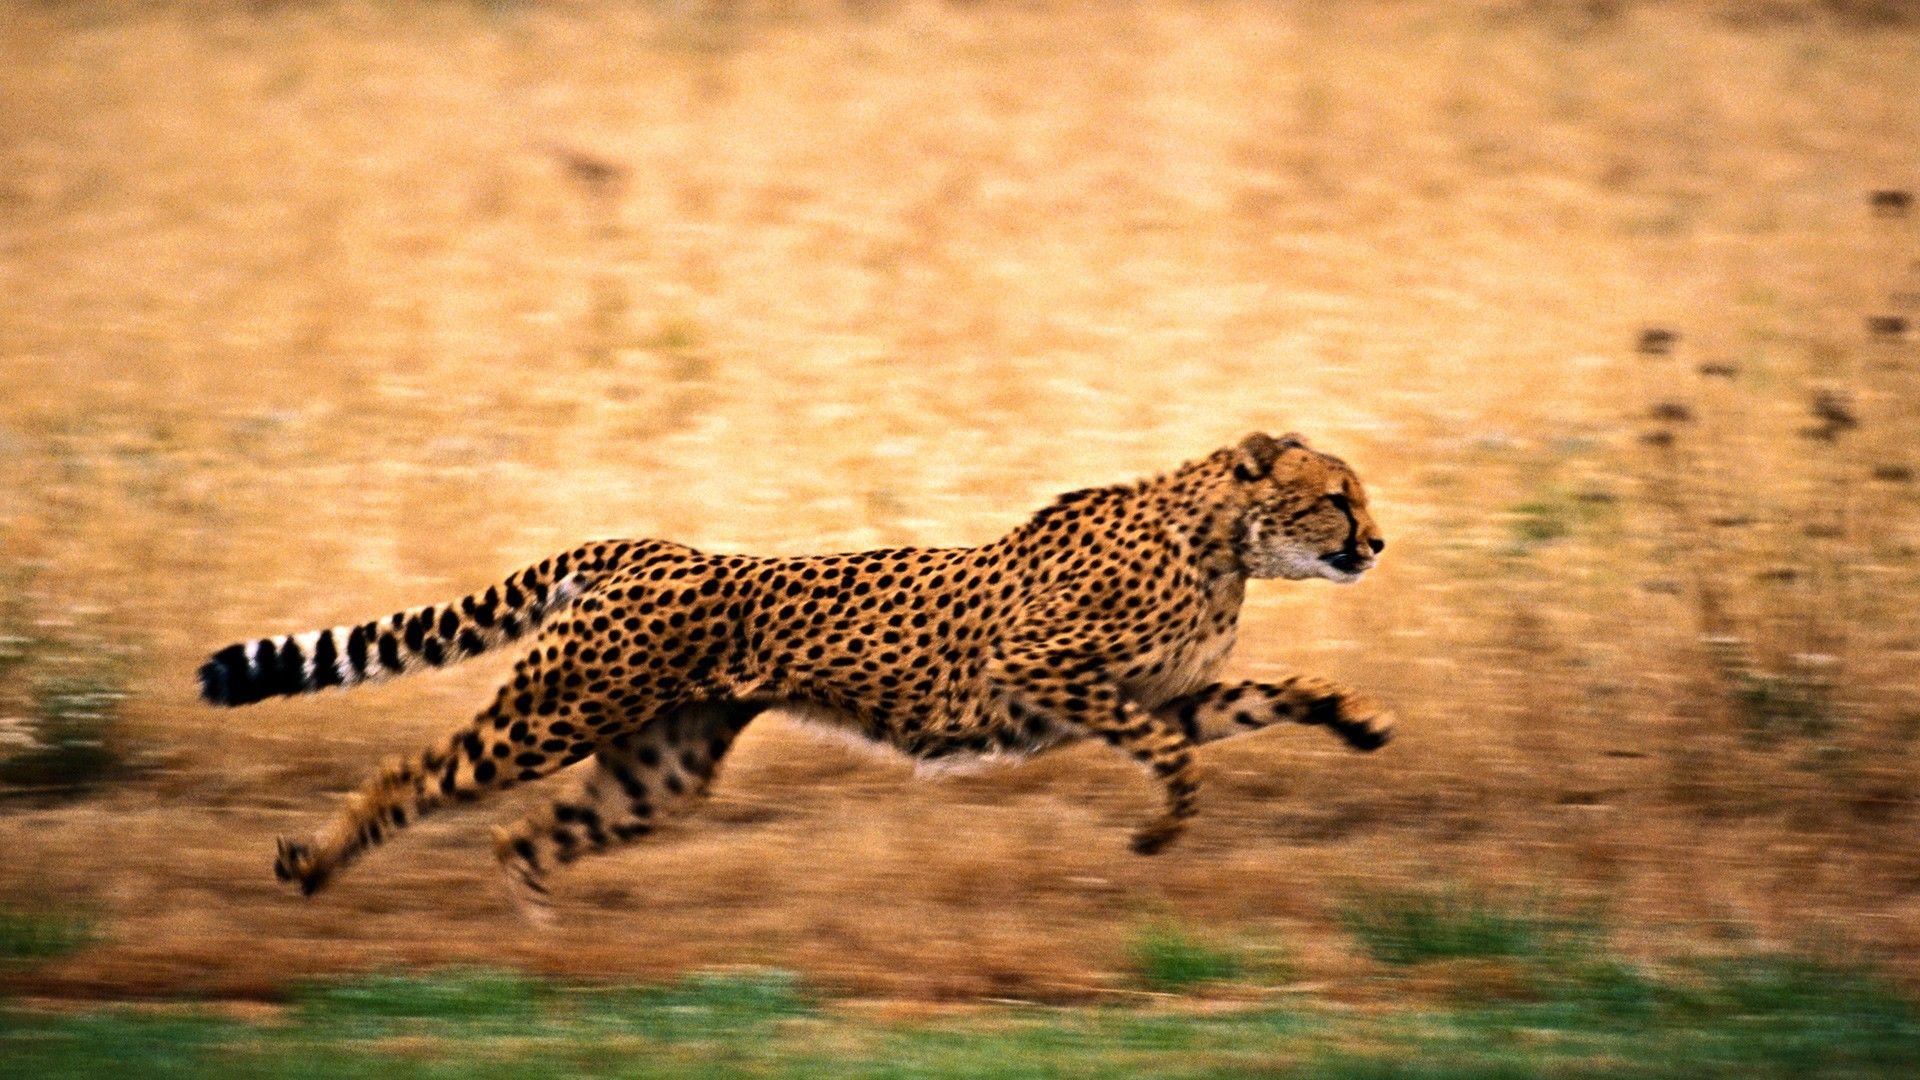 Cheetah HD Wallpaper Image Picture Photo Download